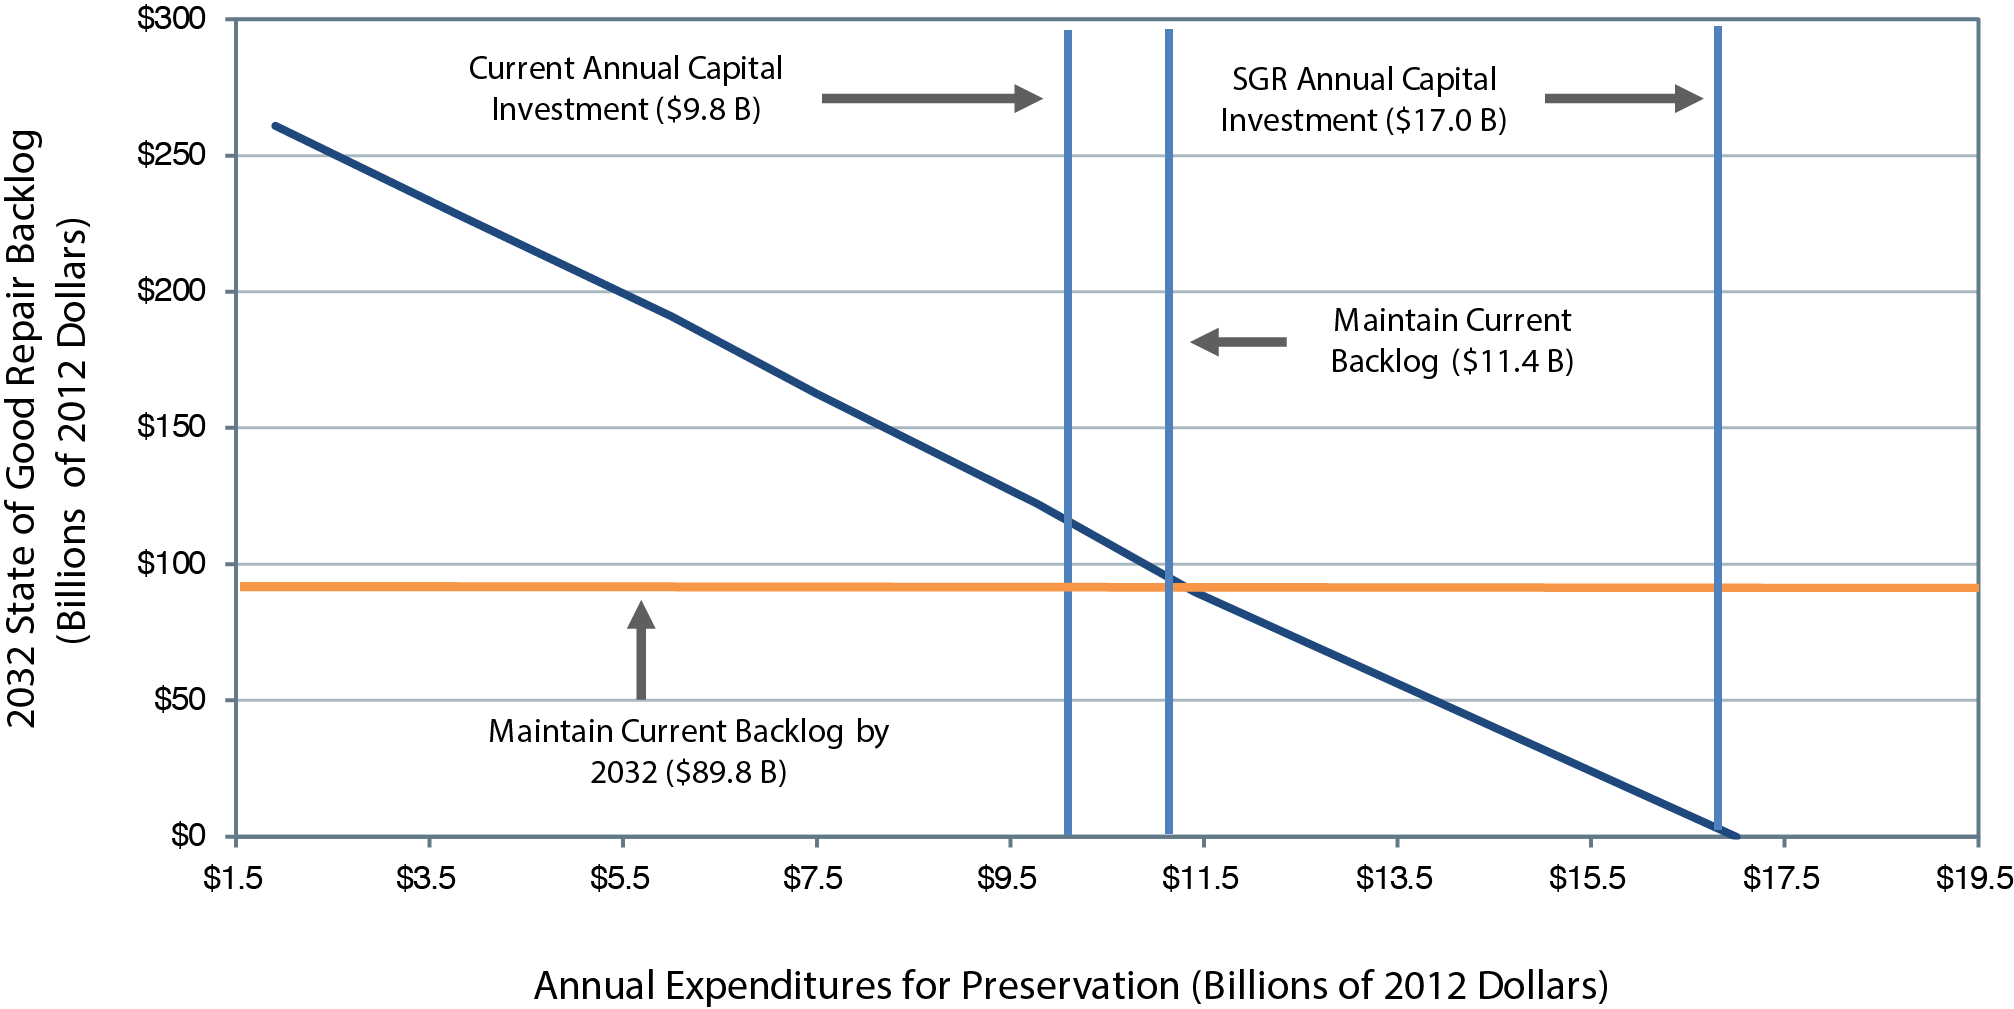 A line chart plots state of good repair backlog in billions of 2012 dollars over annual expenditures for preservation in billions of dollars. The backlog value is approximately $261 billion at an annual expenditure of $1.9 billion. The plot trends steadily downward to backlog of zero at an annual expenditure of $17.0 billion. The plot intersects with the current annual capital investment of $9.8 billion at a backlog value of $122.1 billion, and the current backlog of $89.8 billion is reached at $11.4 billion in annual expenditures. Source: Transit Economic Requirements Model.